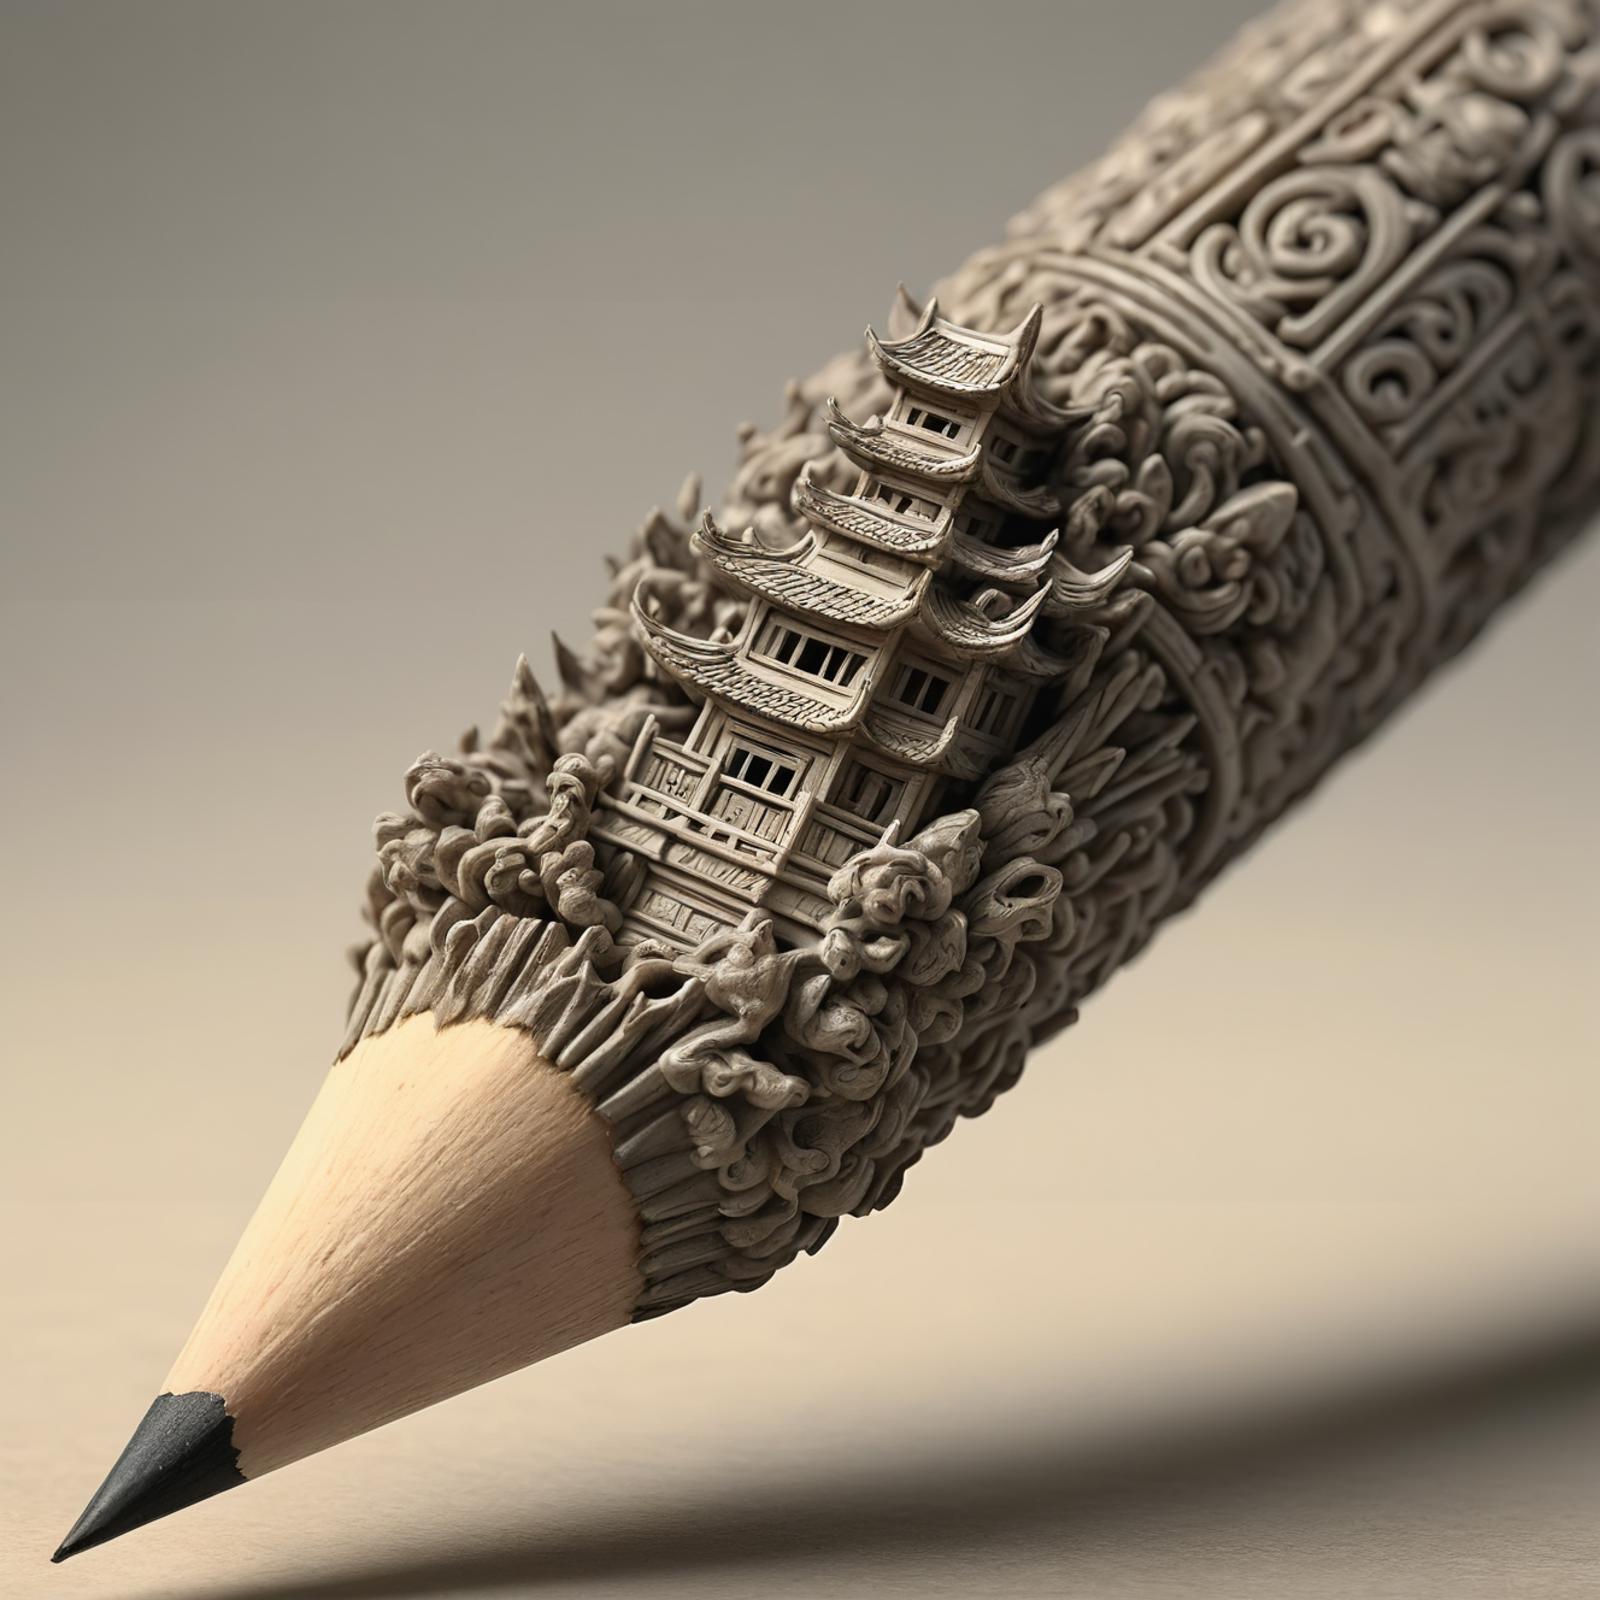 A pencil with a carved wooden design on it.